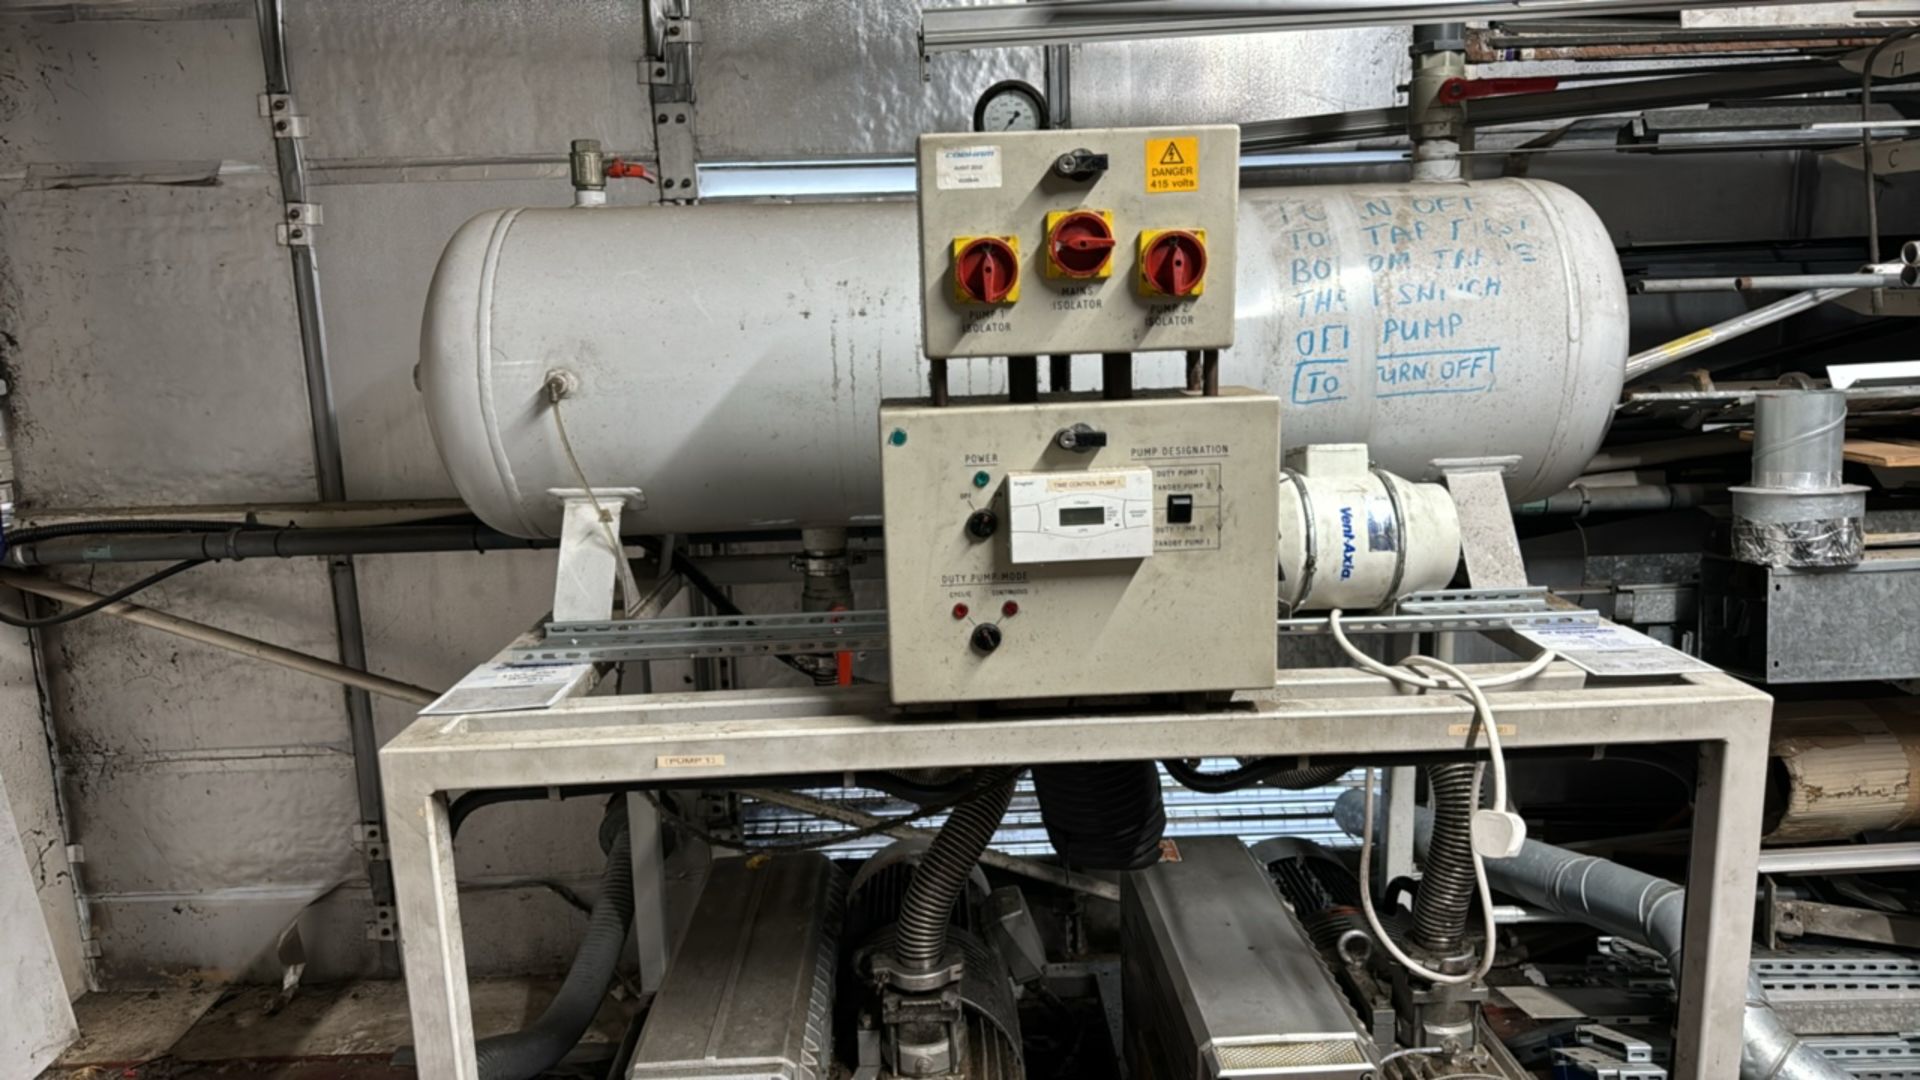 Vent Axia AirTrak Vacuum System Includes Compressor and 2 x BUSCH Rotary Vane Vacuum Pumps - Image 11 of 11